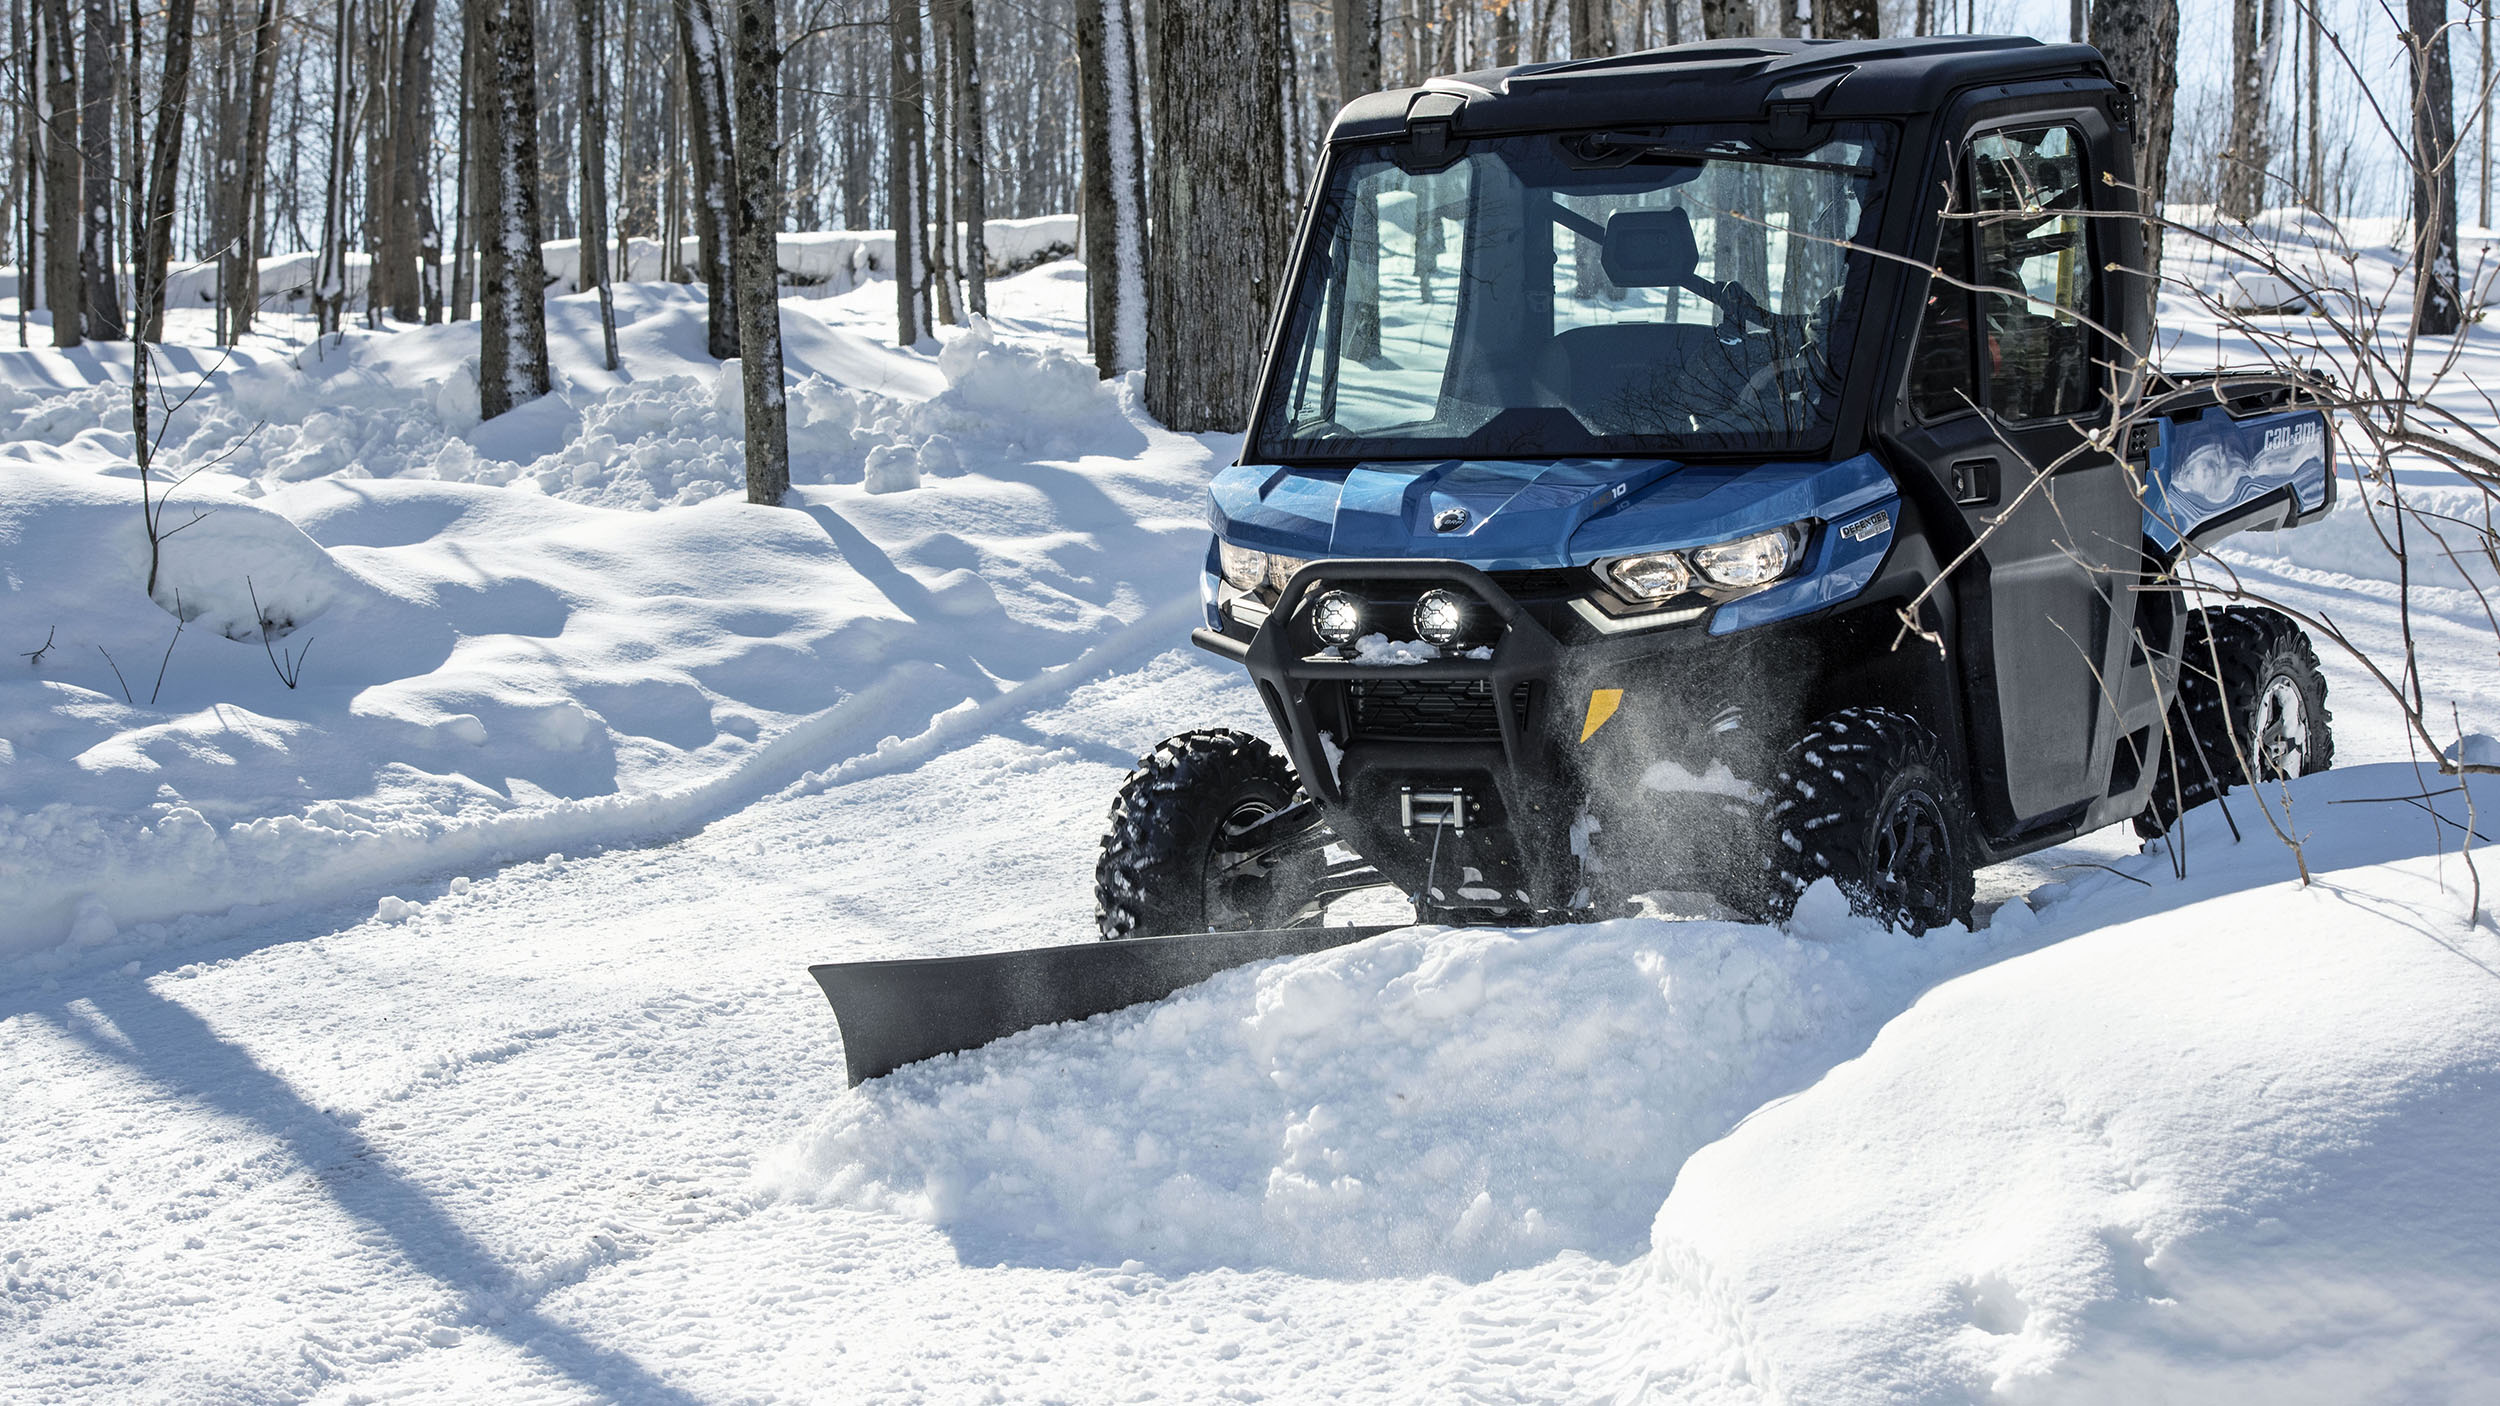 A Can-Am Defender plowing snow